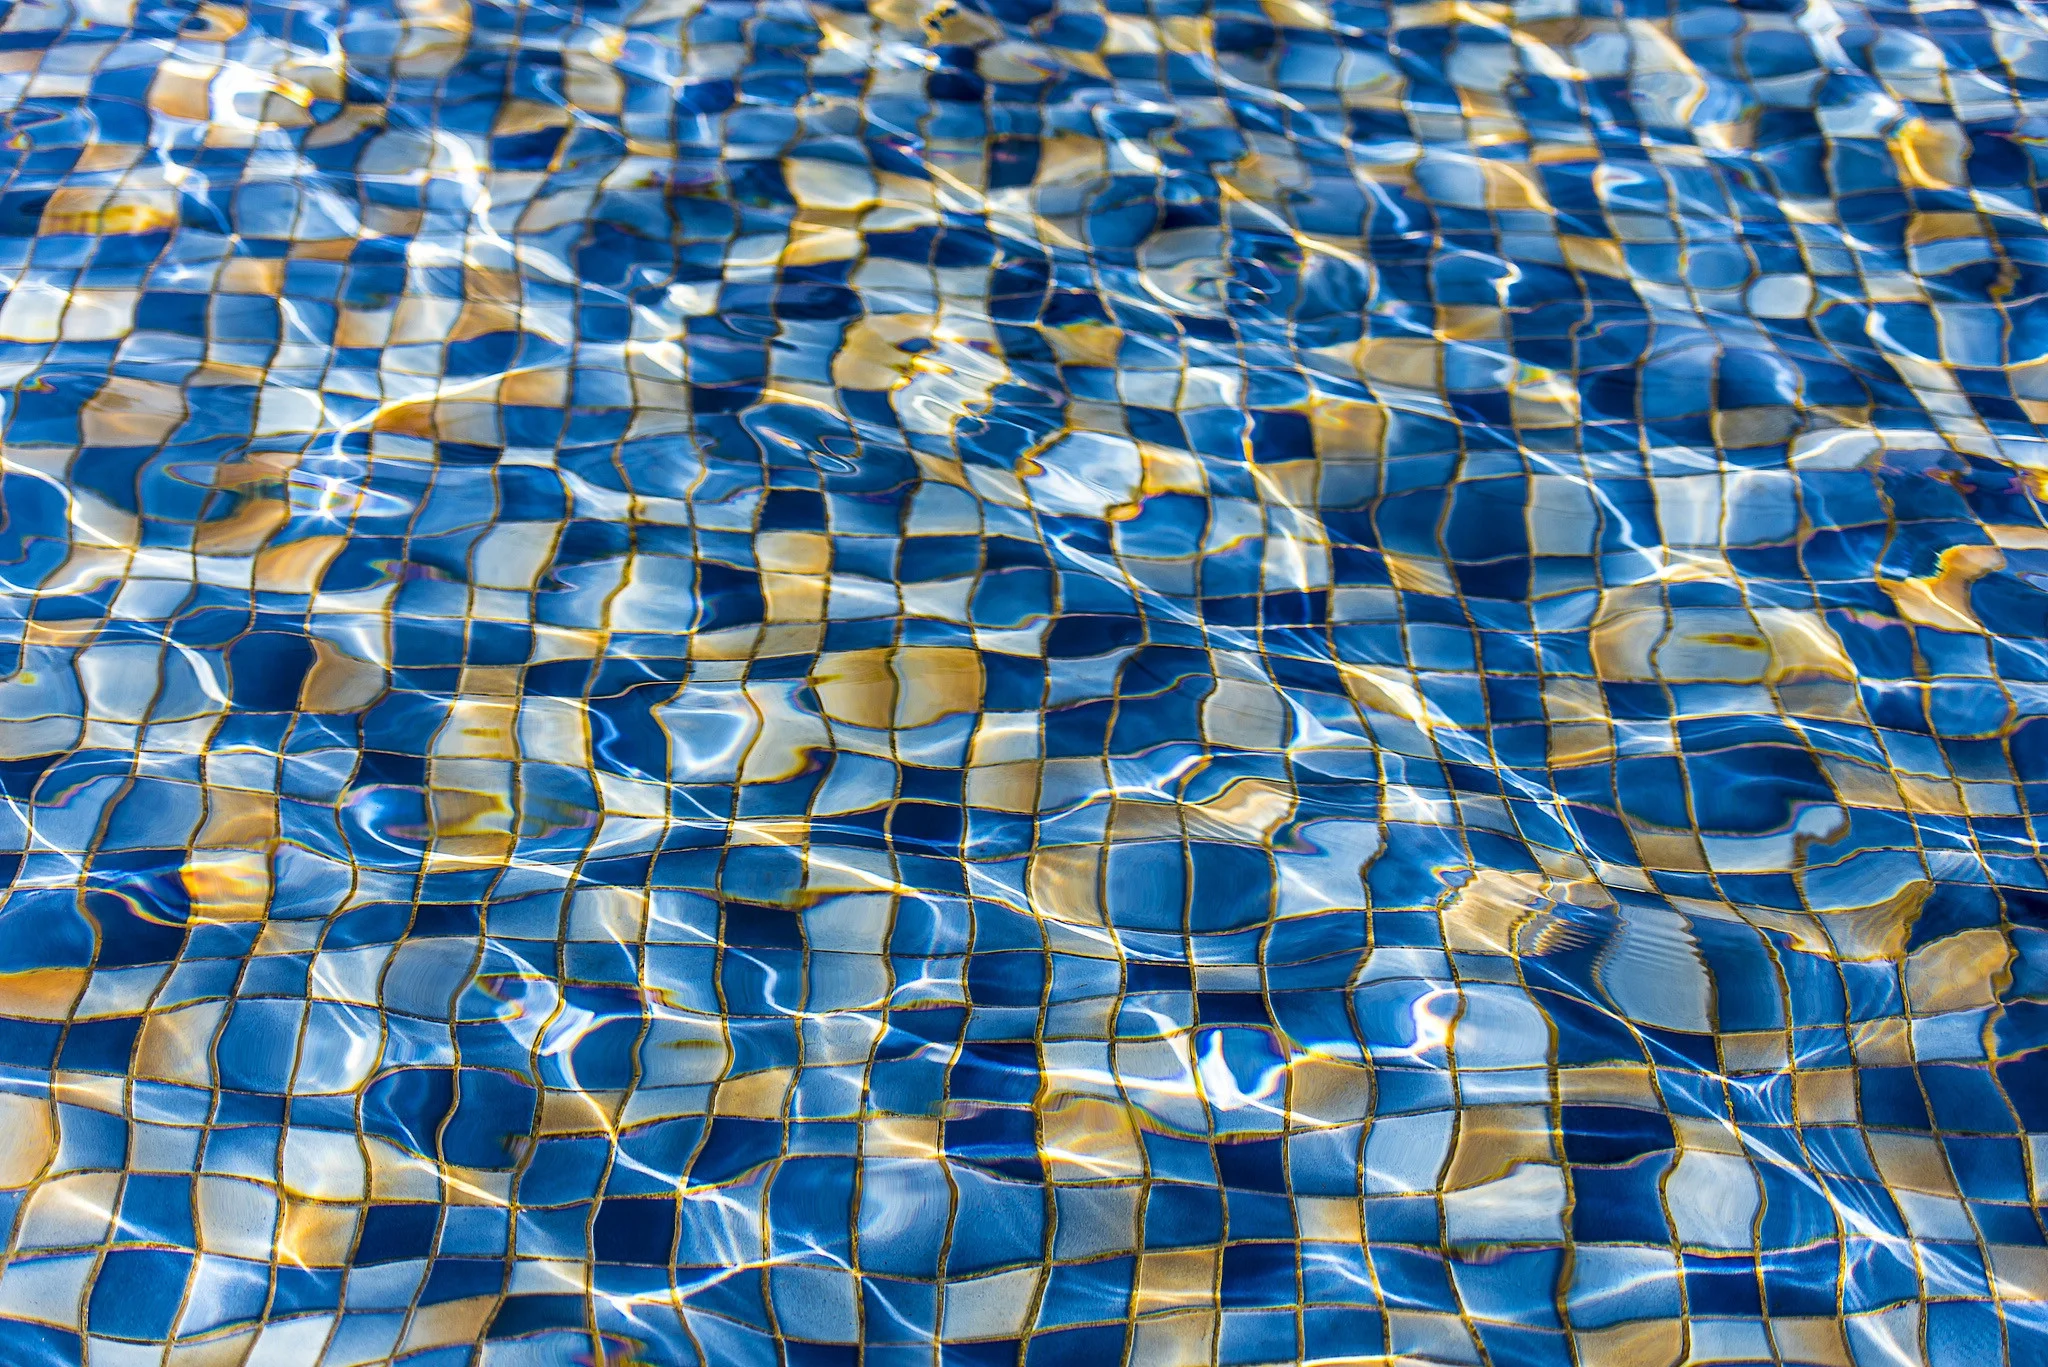 Water in the Pool a Mosaic